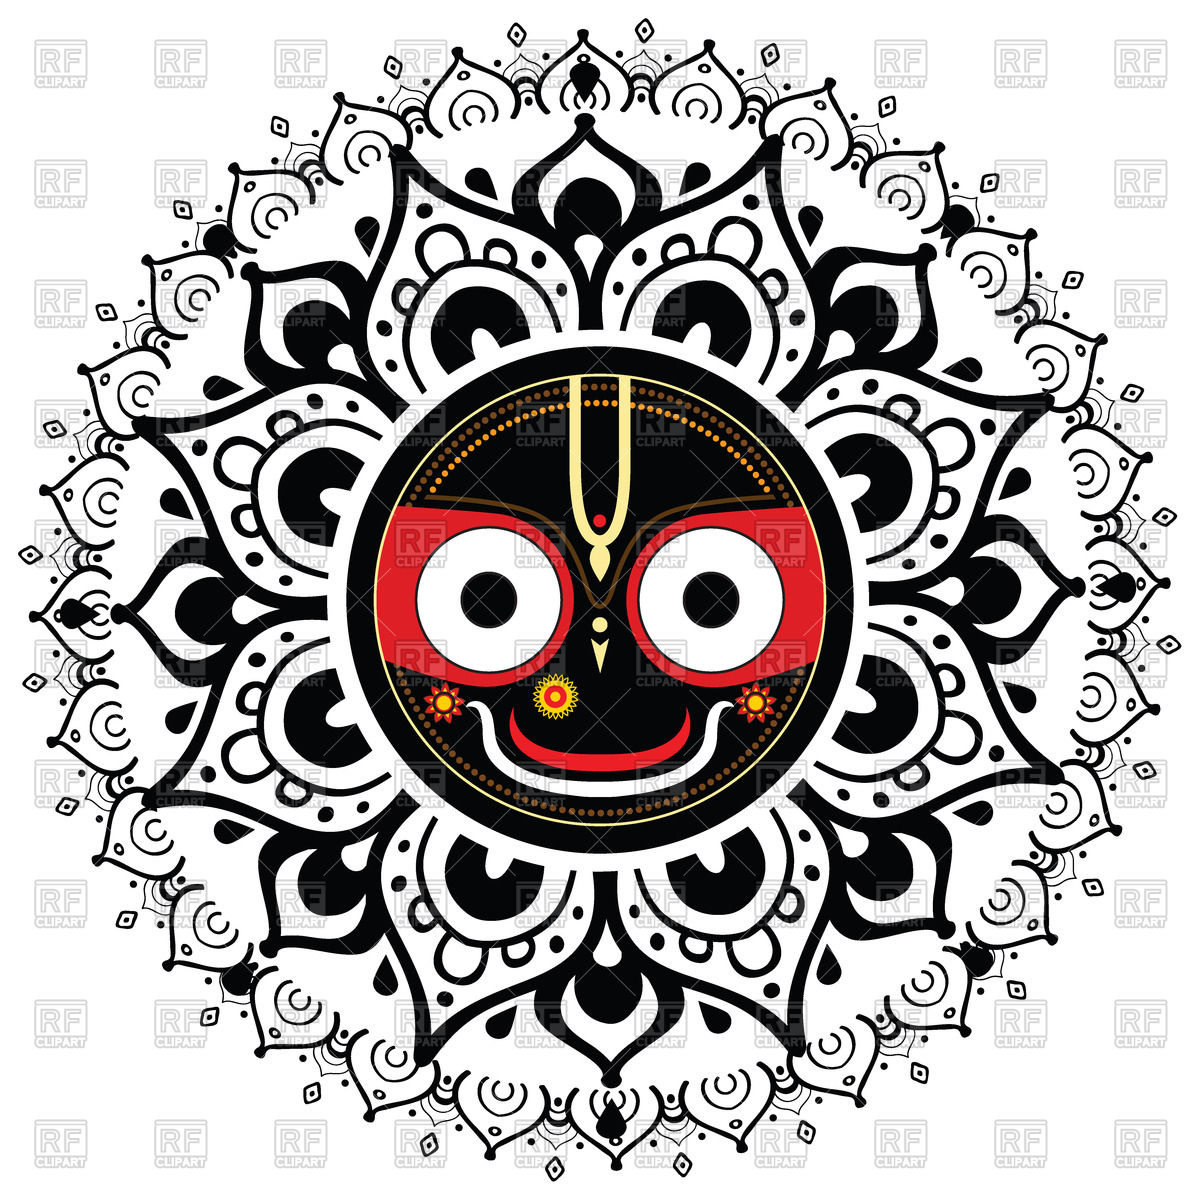 jagannath-jagannatha-indian-god-of-the-universe-in-round-ornament-Download-Royalty-free-Vector-File-EPS-103392